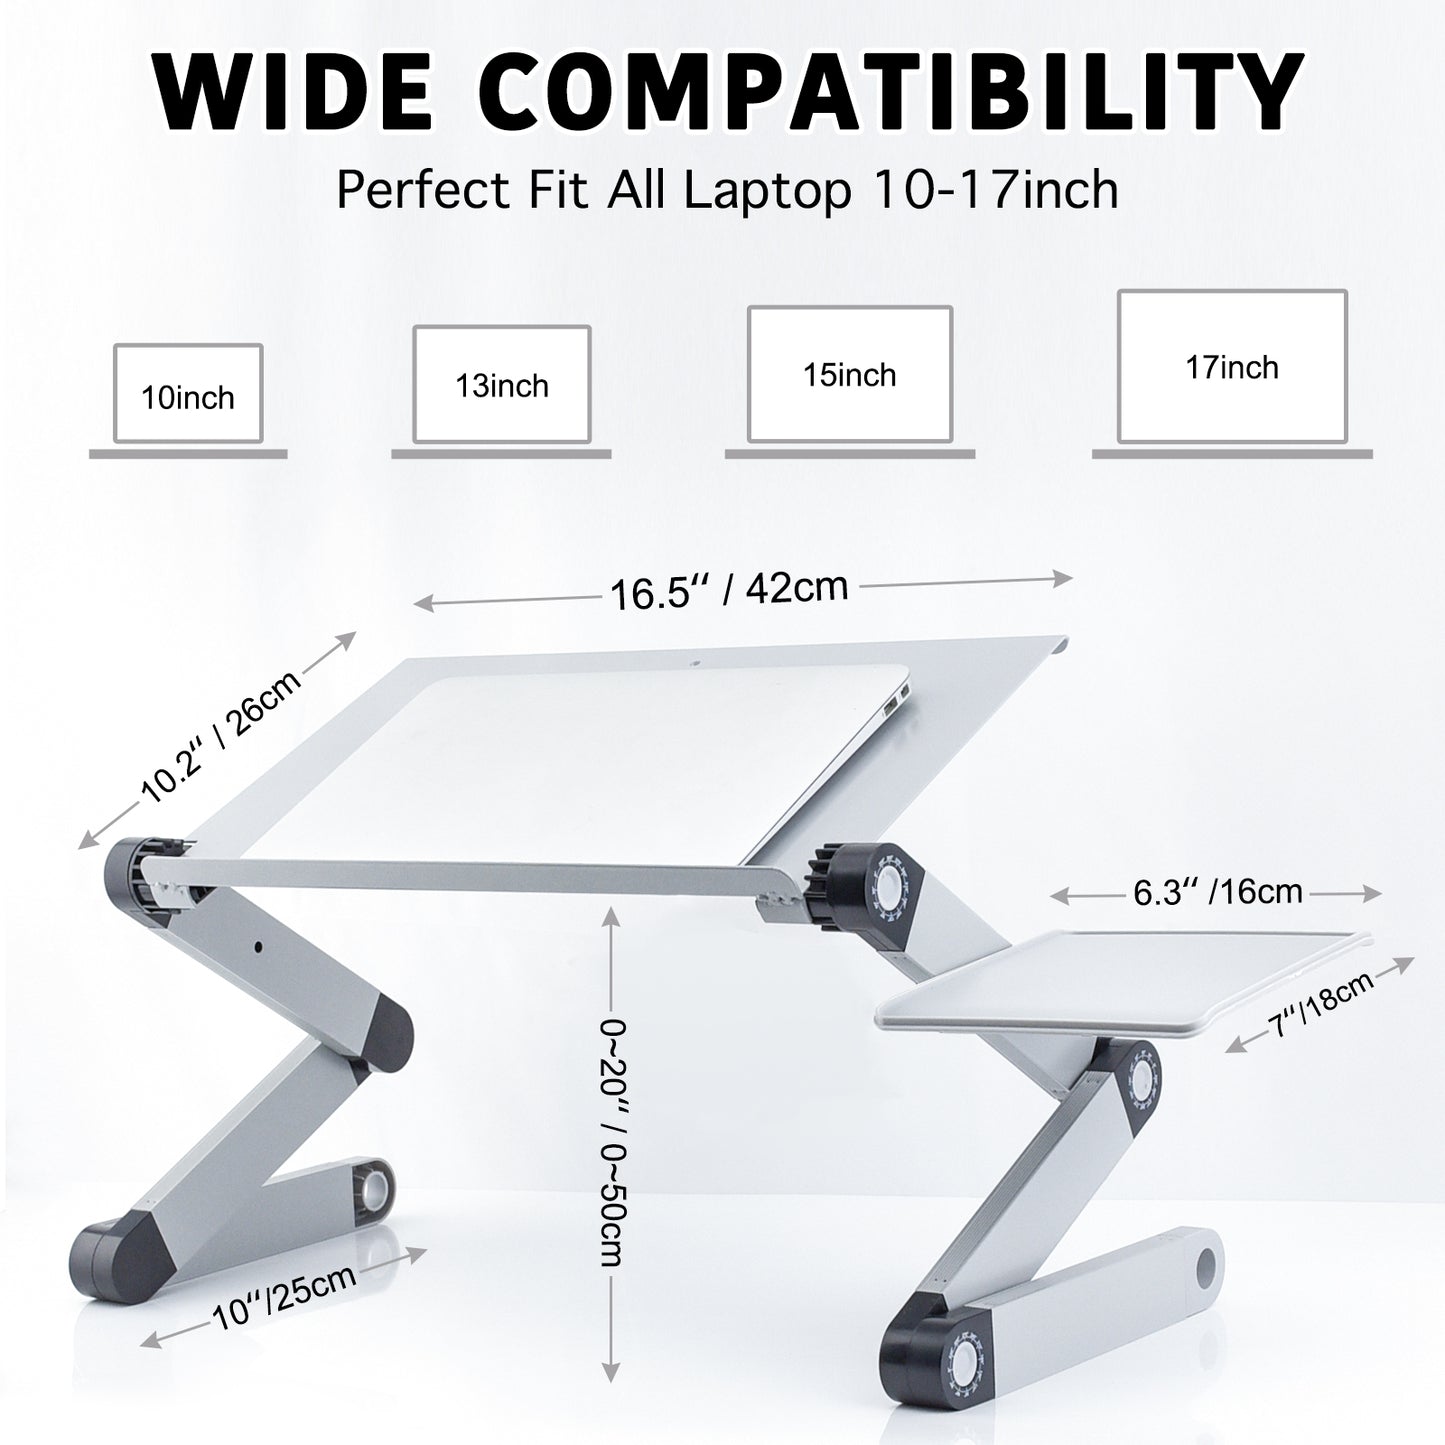 Adjustable Height Laptop Desk Laptop Stand for Bed Portable Lap Desk Foldable Table Workstation Notebook RiserErgonomic Computer Tray Reading Holder Bed Tray Standing Desk Silver Amazon Banned